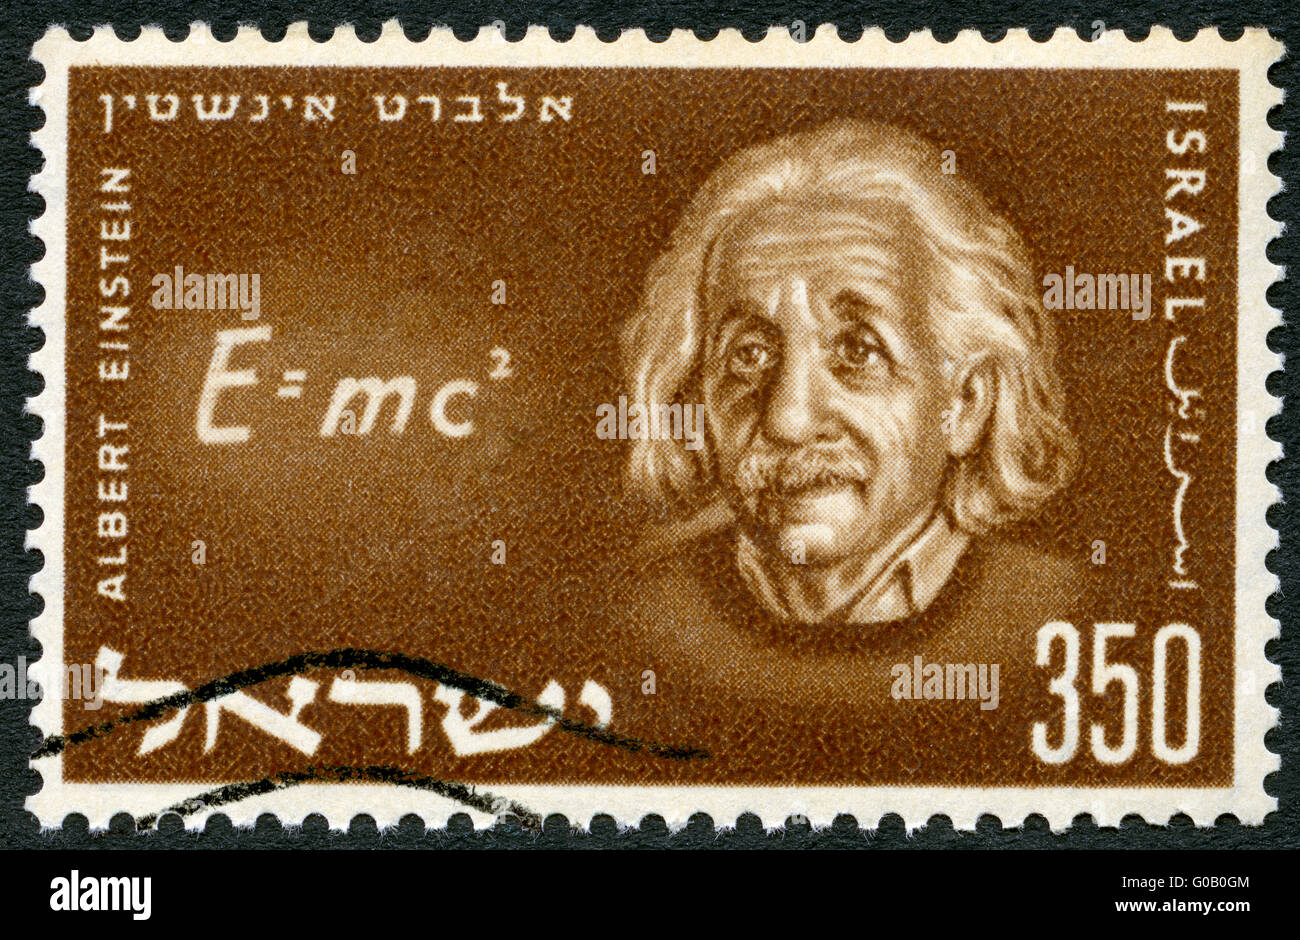 ISRAEL - 1956: shows Albert Einstein (1879-1955) and Equation of his Relativity Theory Stock Photo